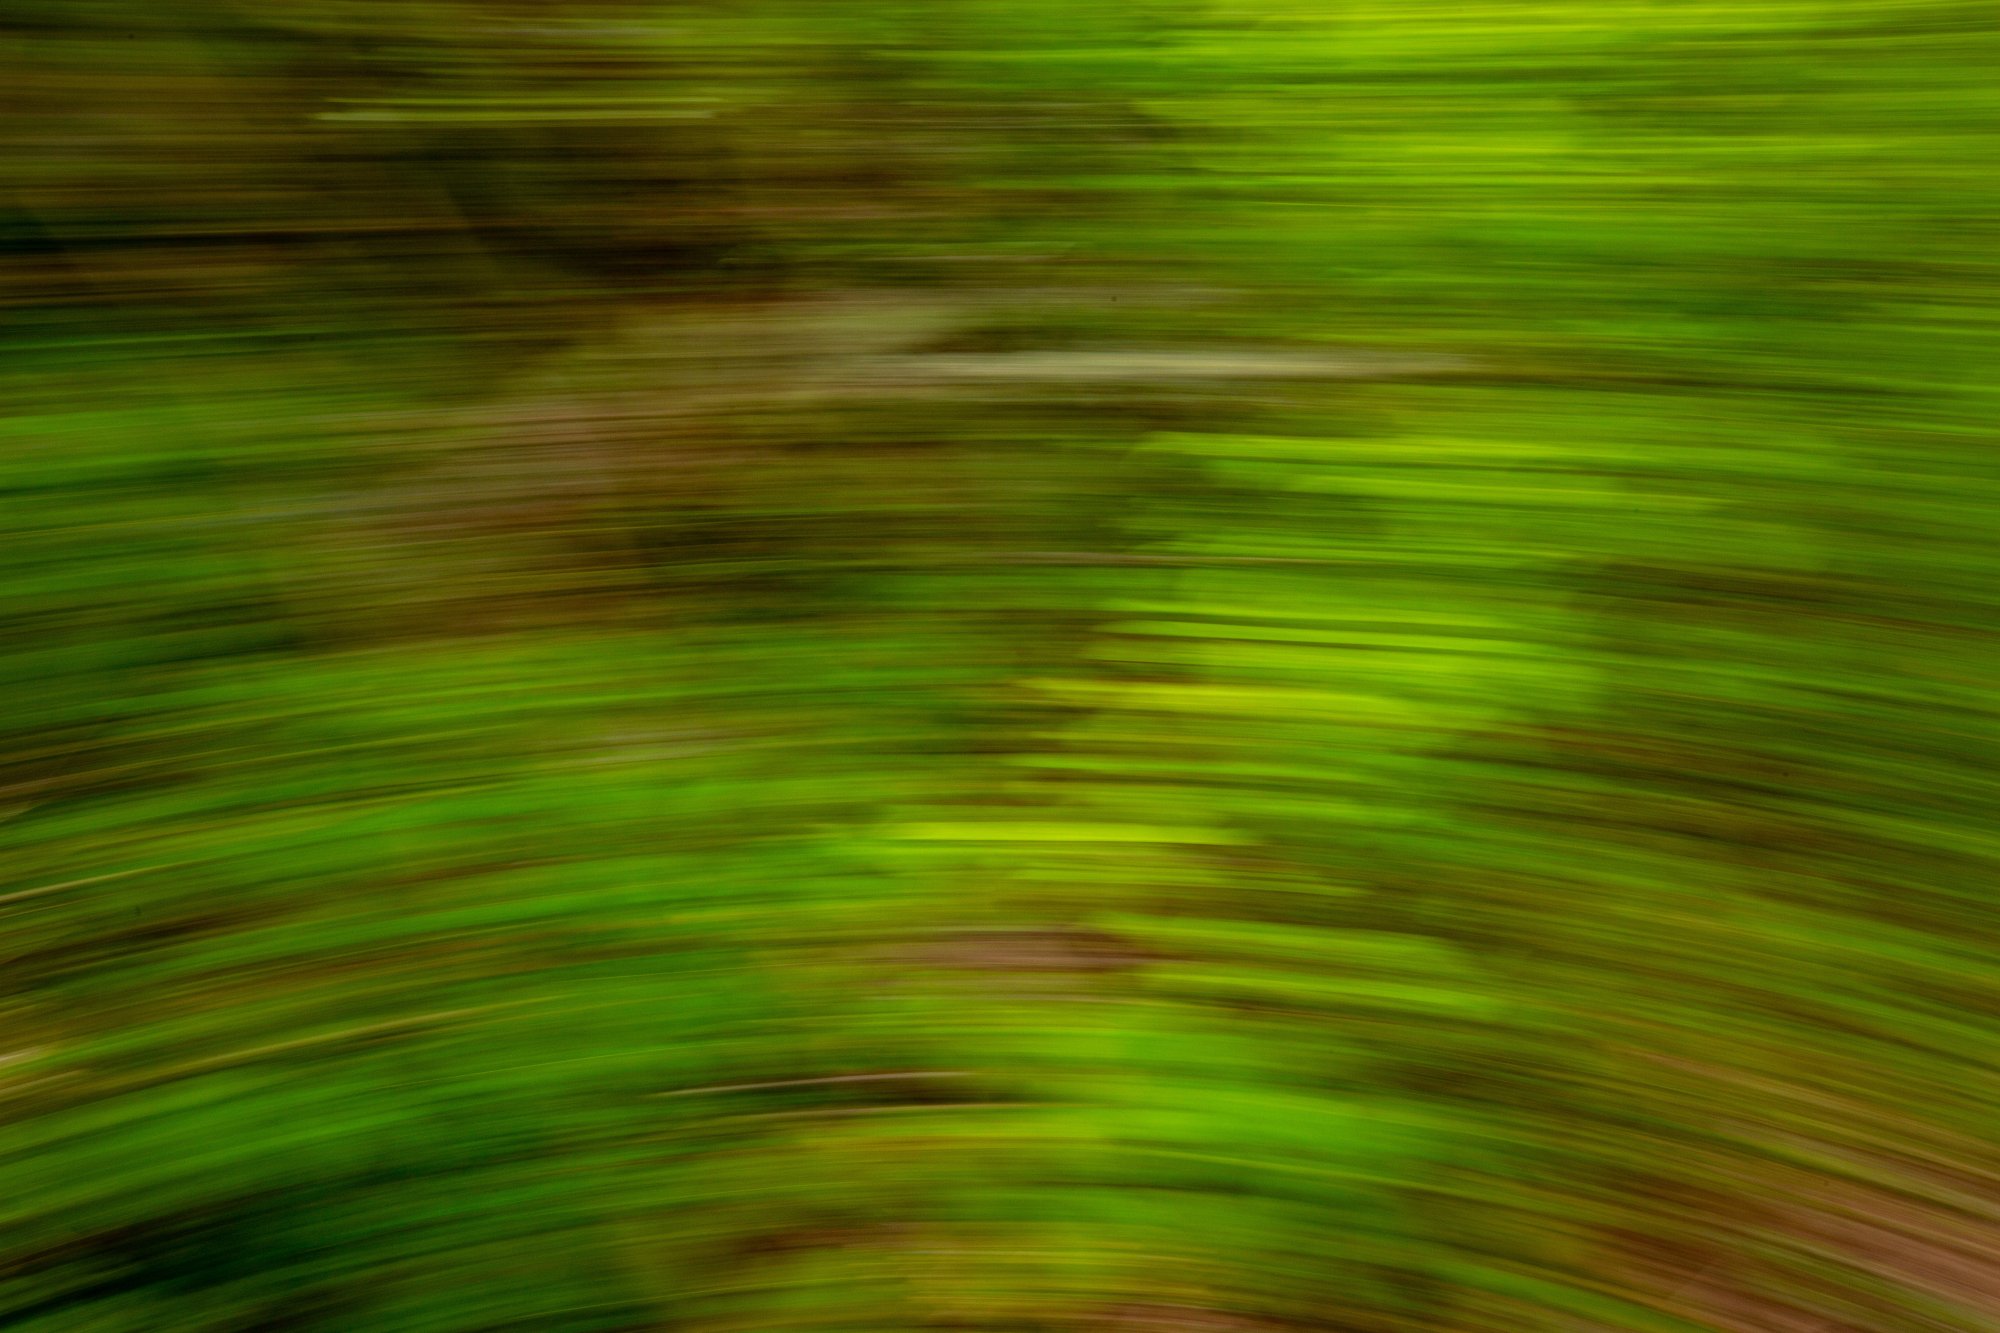 blurred greenery. With overlay looks like painted brush strokes